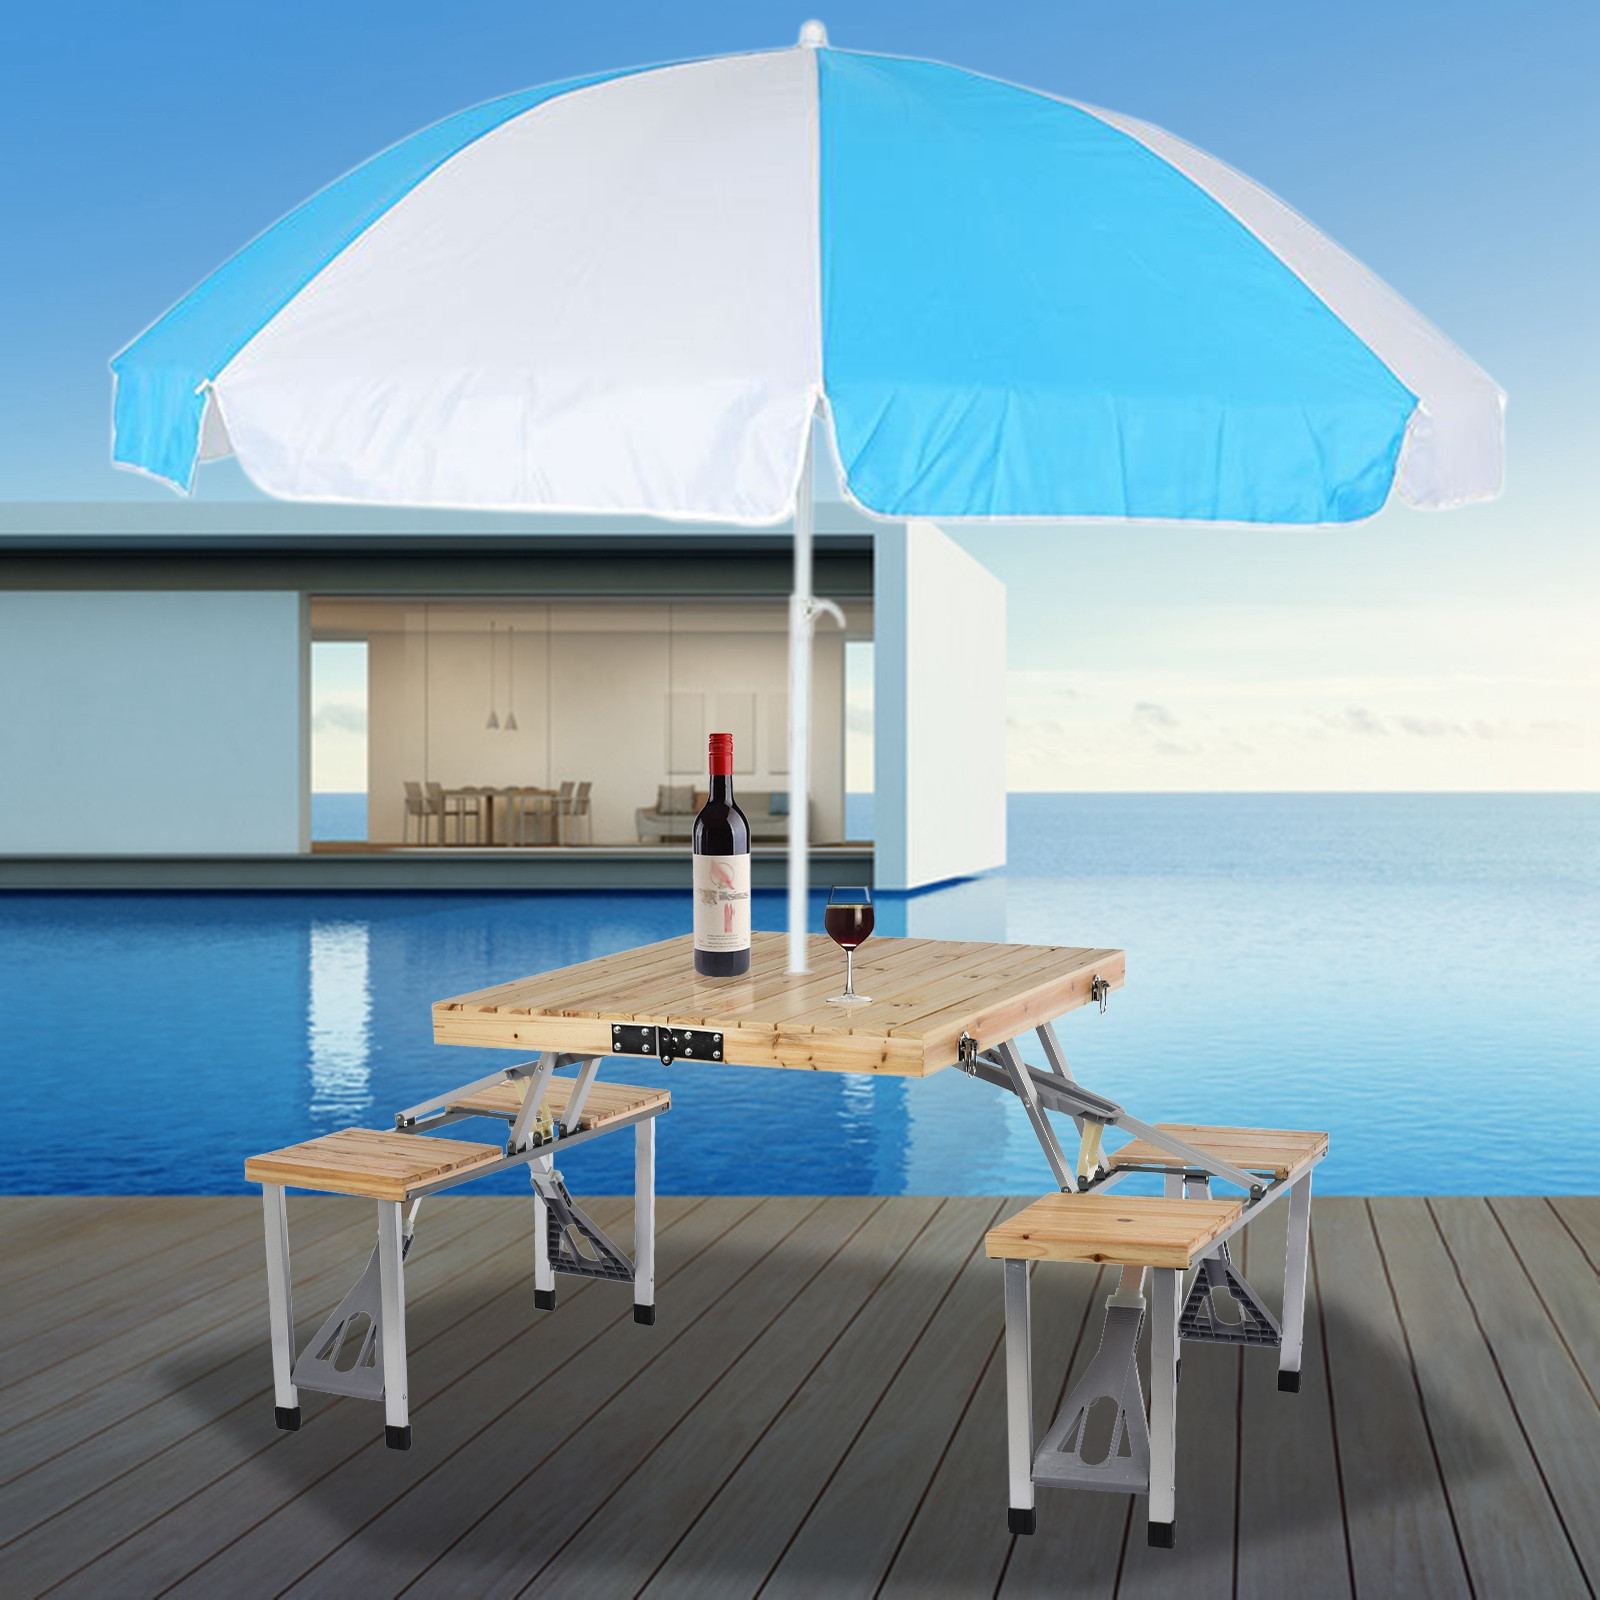 Portable Foldable Camping  Table With Seats Chairs And Umbrella Hole